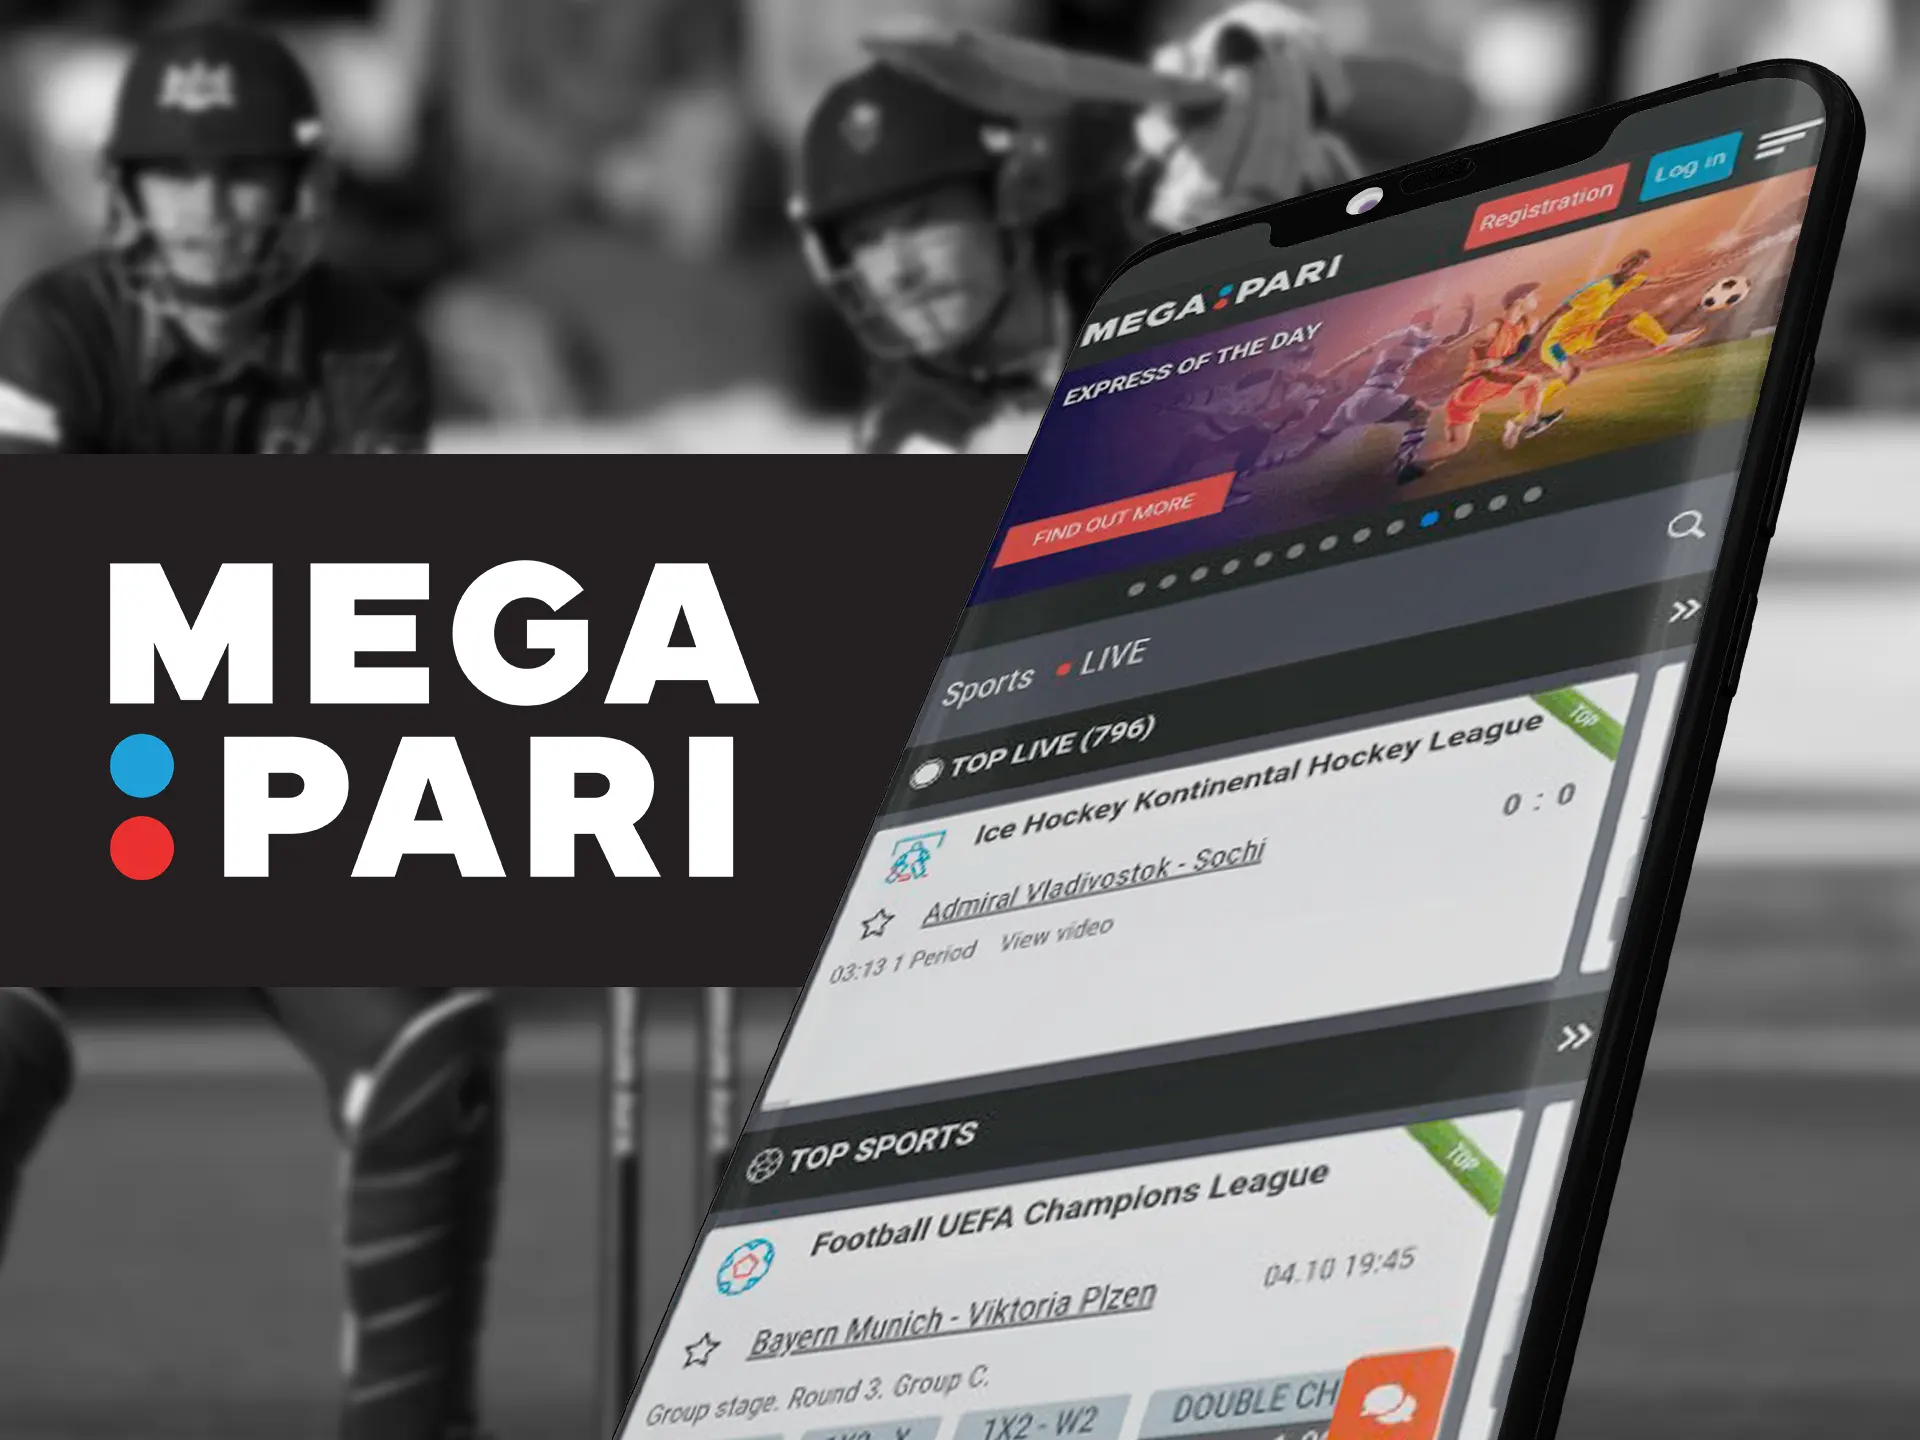 Megapari app allow you to watch cricket matches online.